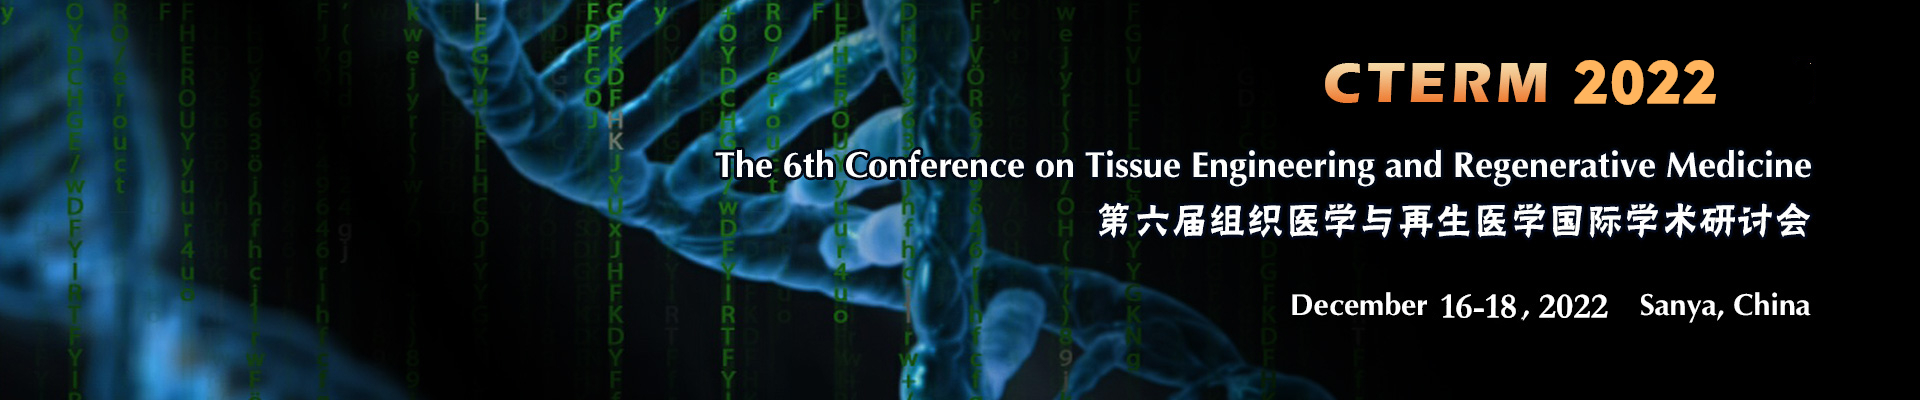 The 6th Int'l Conference on Tissue Engineering and Regenerative Medicine (CTERM 2022), Sanya, Hainan, China